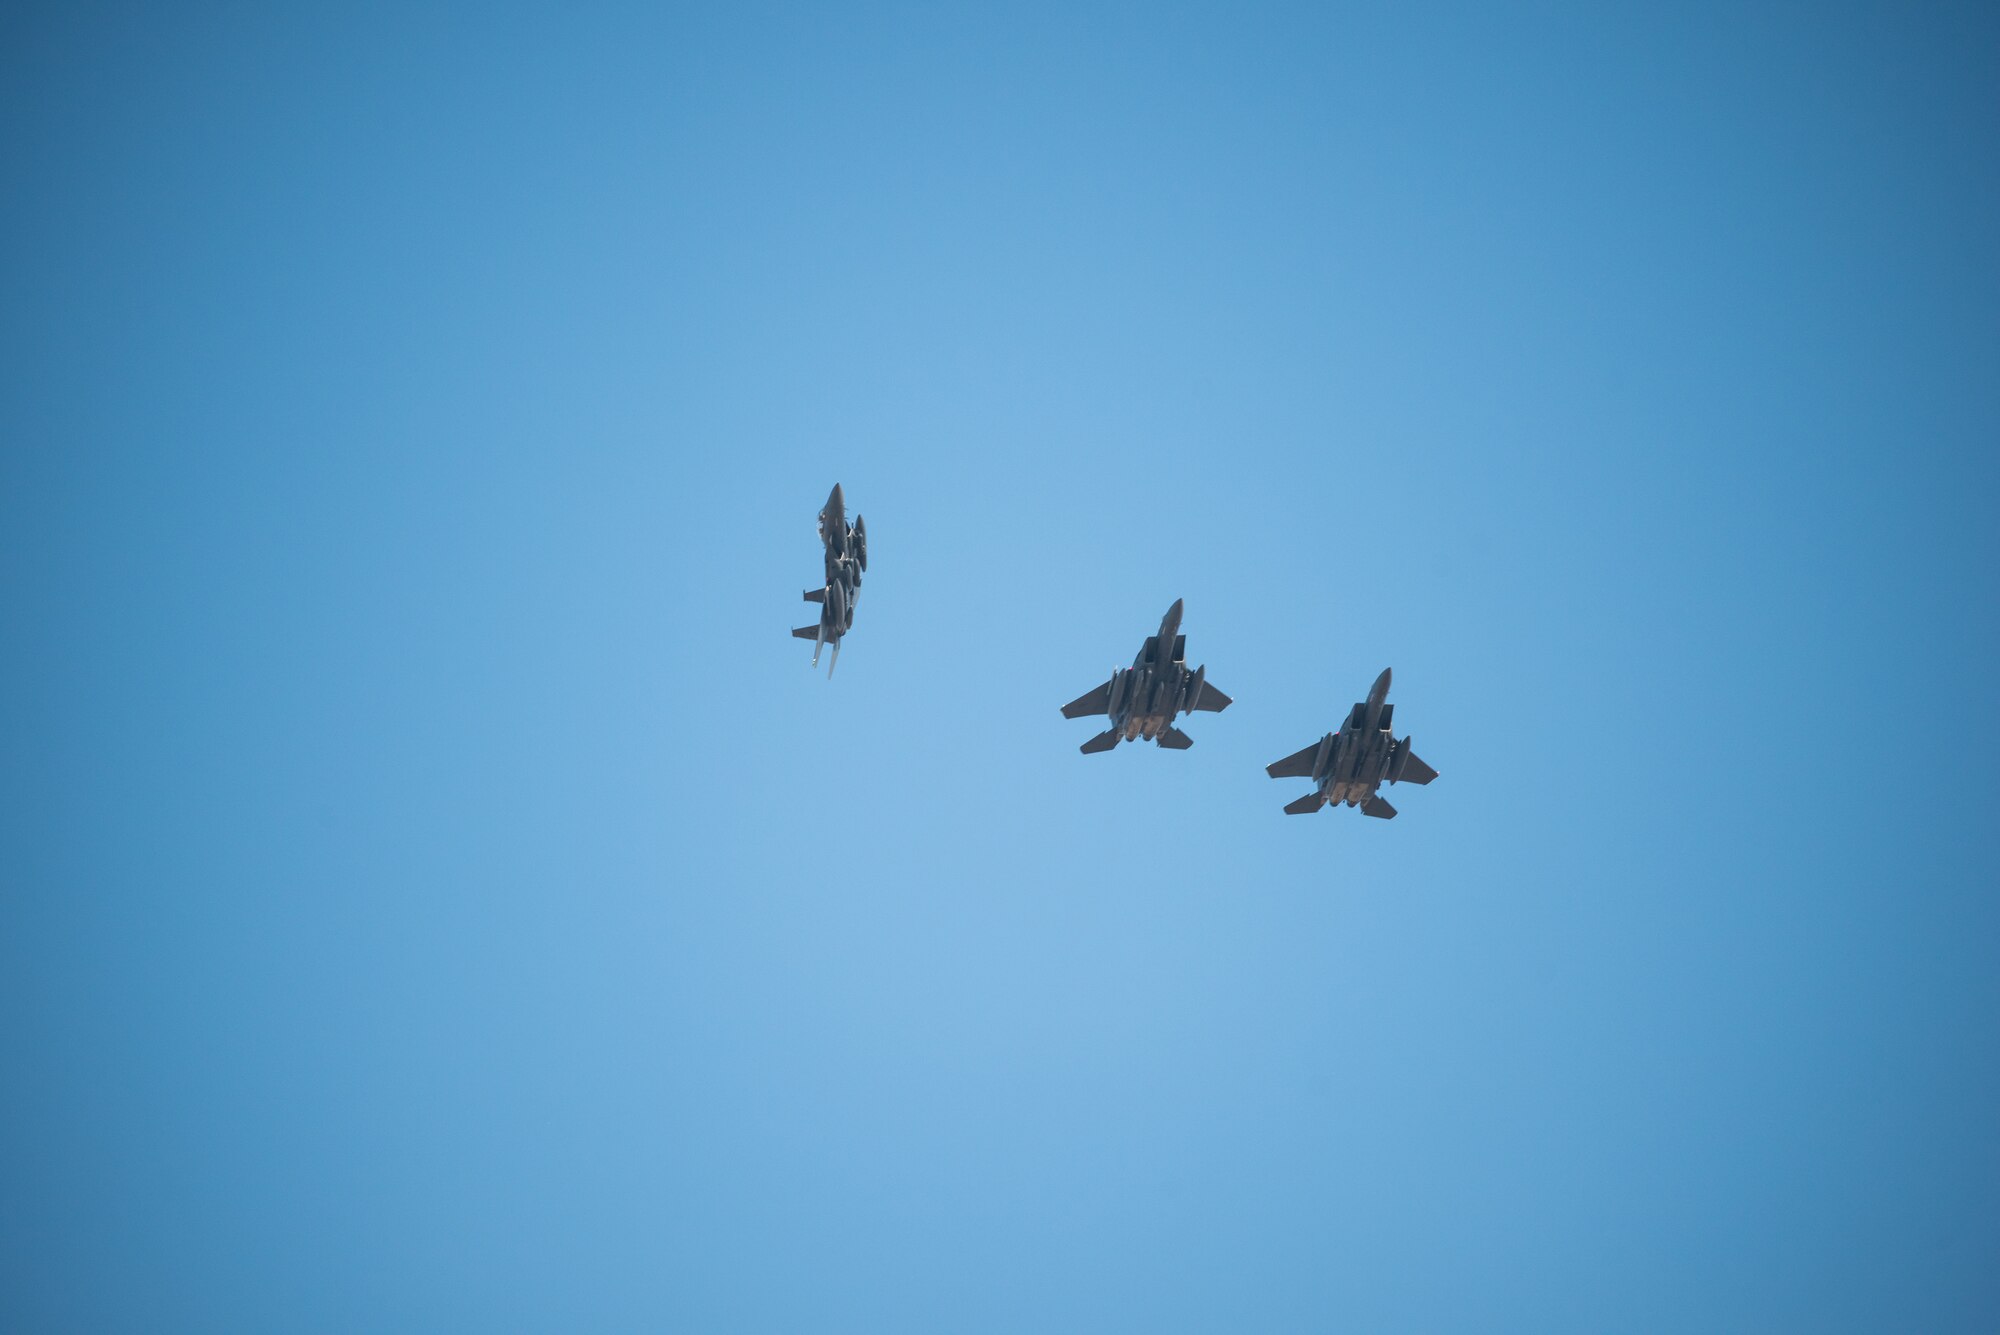 Three F-15E Strike Eagles from the 336th Fighter Squadron, 4th Fighter Wing at Seymour Johnson Air Force Base, North Carolina prepare to land at Al Dhafra Air Base, United Arab Emirates, June 14, 2019. The F-15E’s joined ADABs inventory of other fighters to include F-15C Eagles and F-35A Lightning IIs. (U.S. Air Force photo by Staff Sgt. Chris Thornbury)